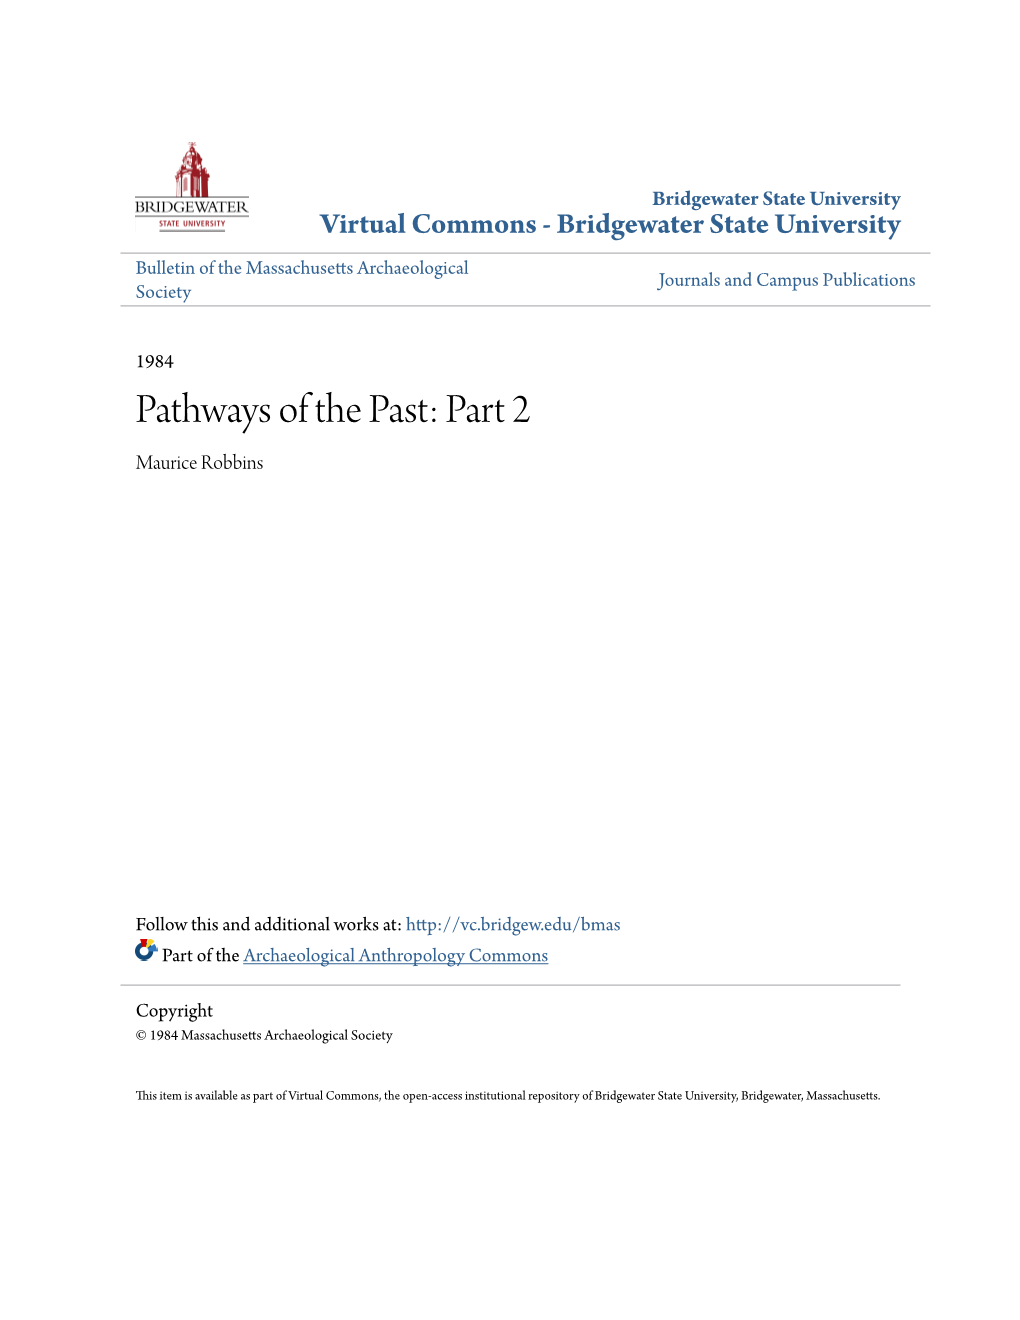 Pathways of the Past: Part 2 Maurice Robbins